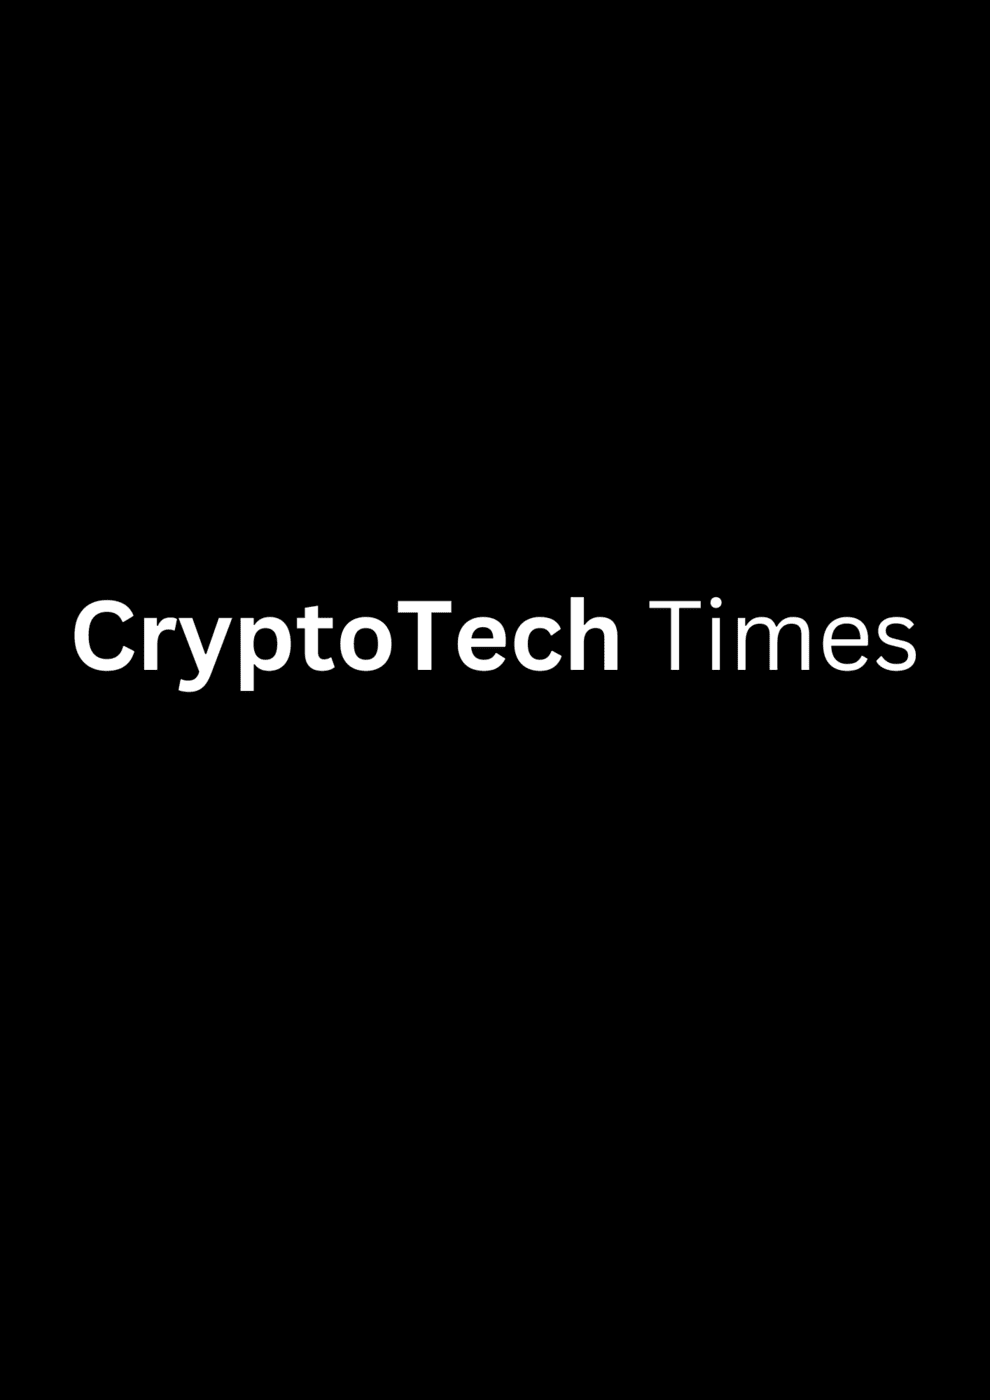 CryptoTech Times  Best Digital Publication in India - Andhra Pradesh - Hyderabad ID1524242